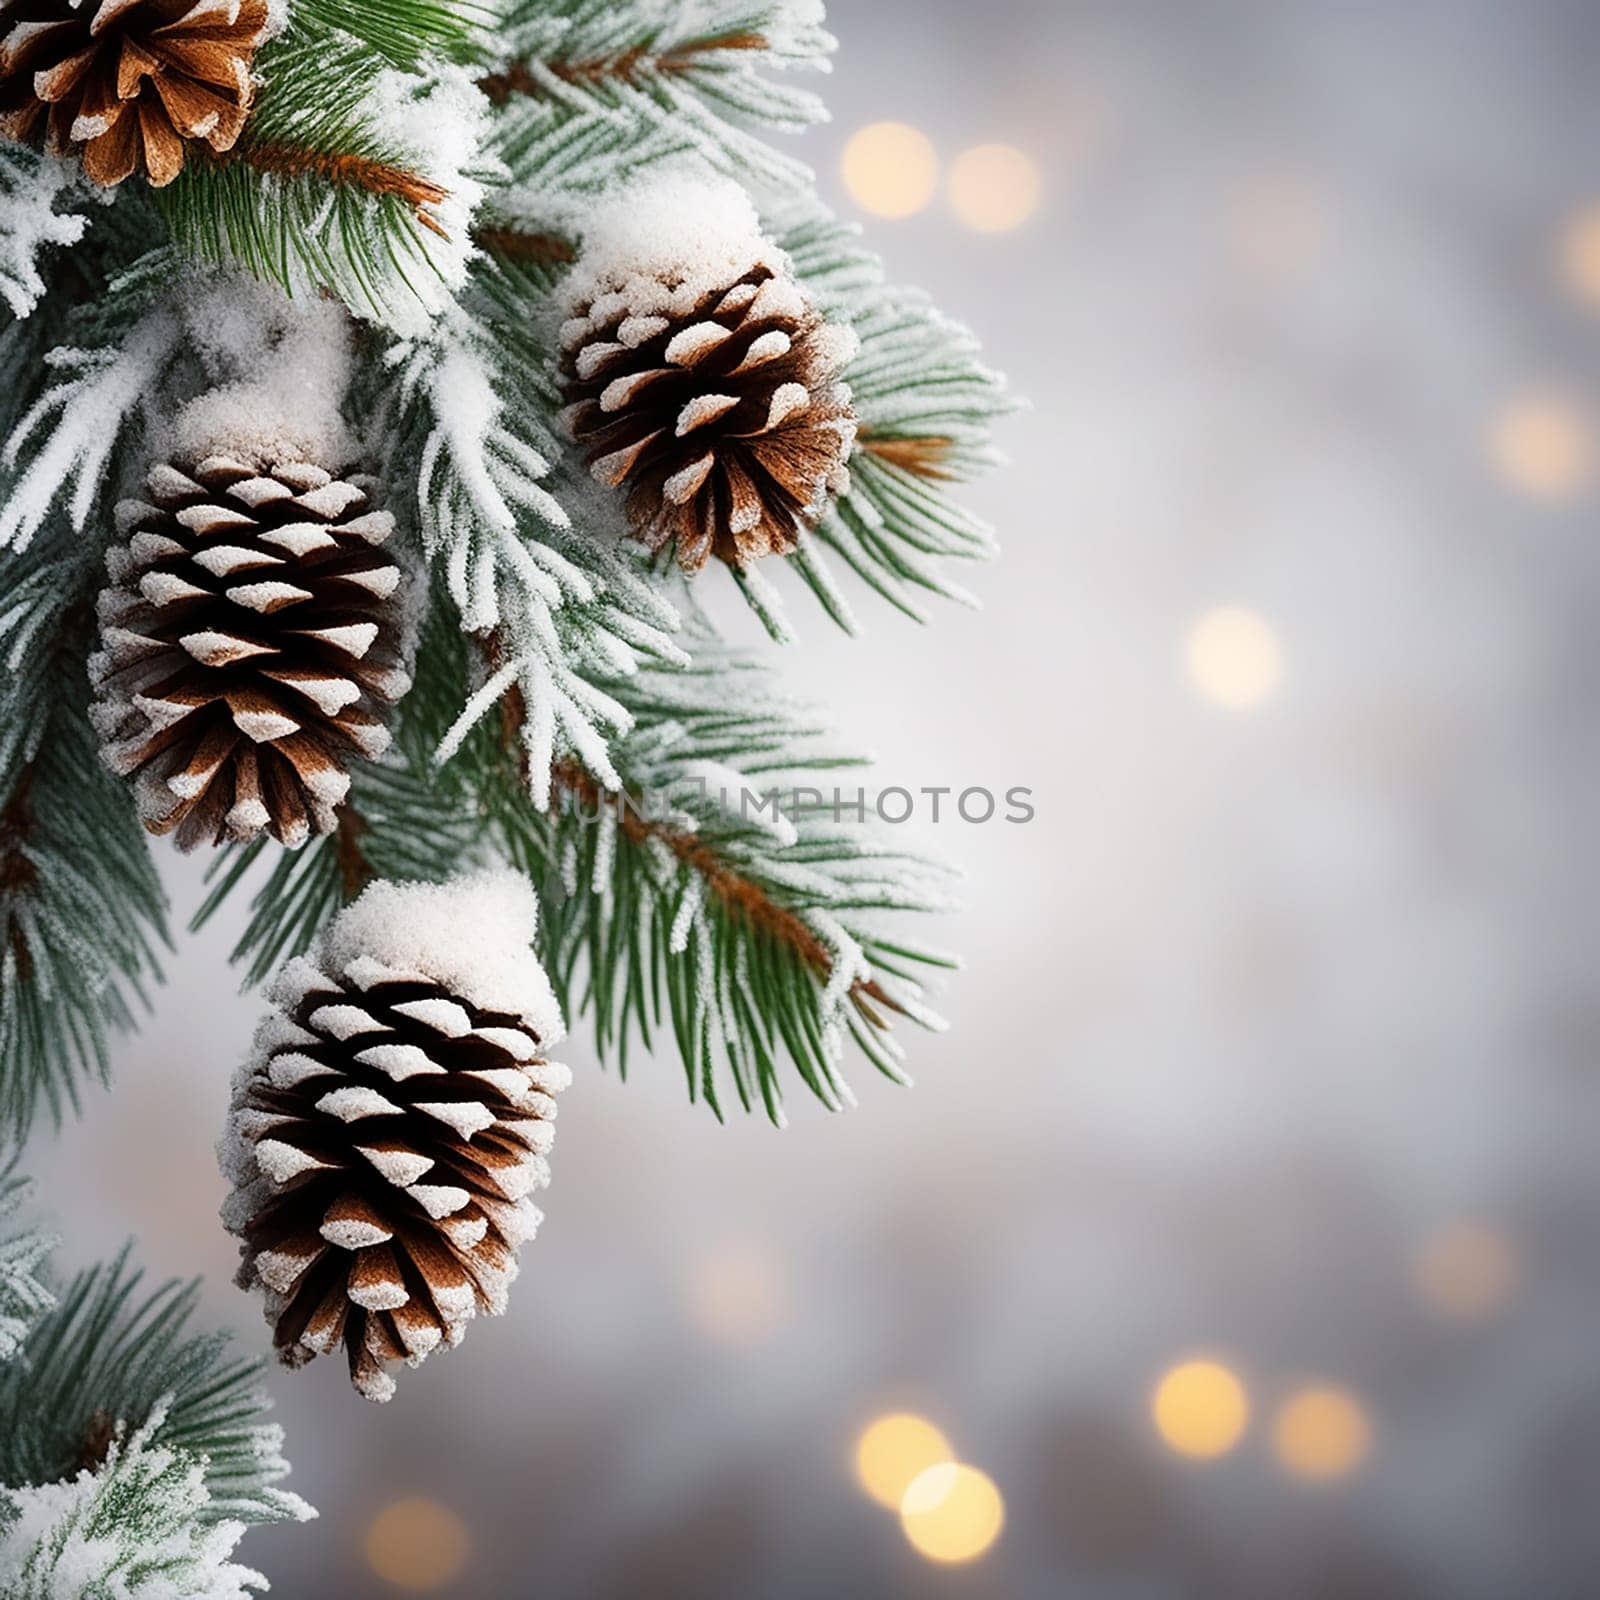 Snowy Pine Cones on Fir Branch with Lights - Decoration Banner